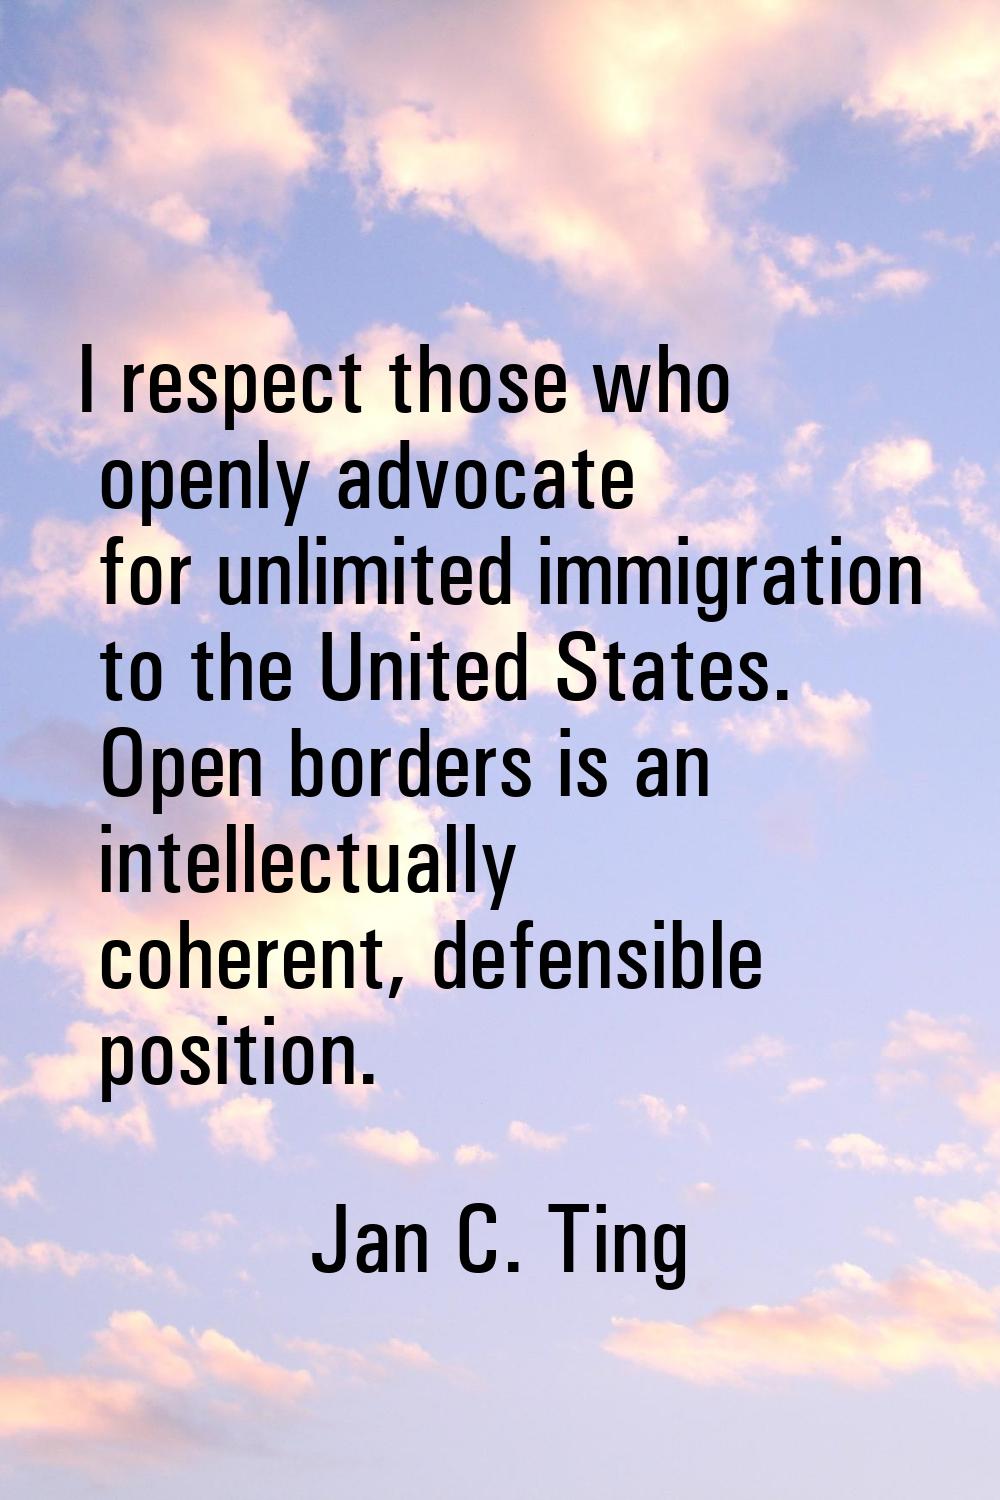 I respect those who openly advocate for unlimited immigration to the United States. Open borders is